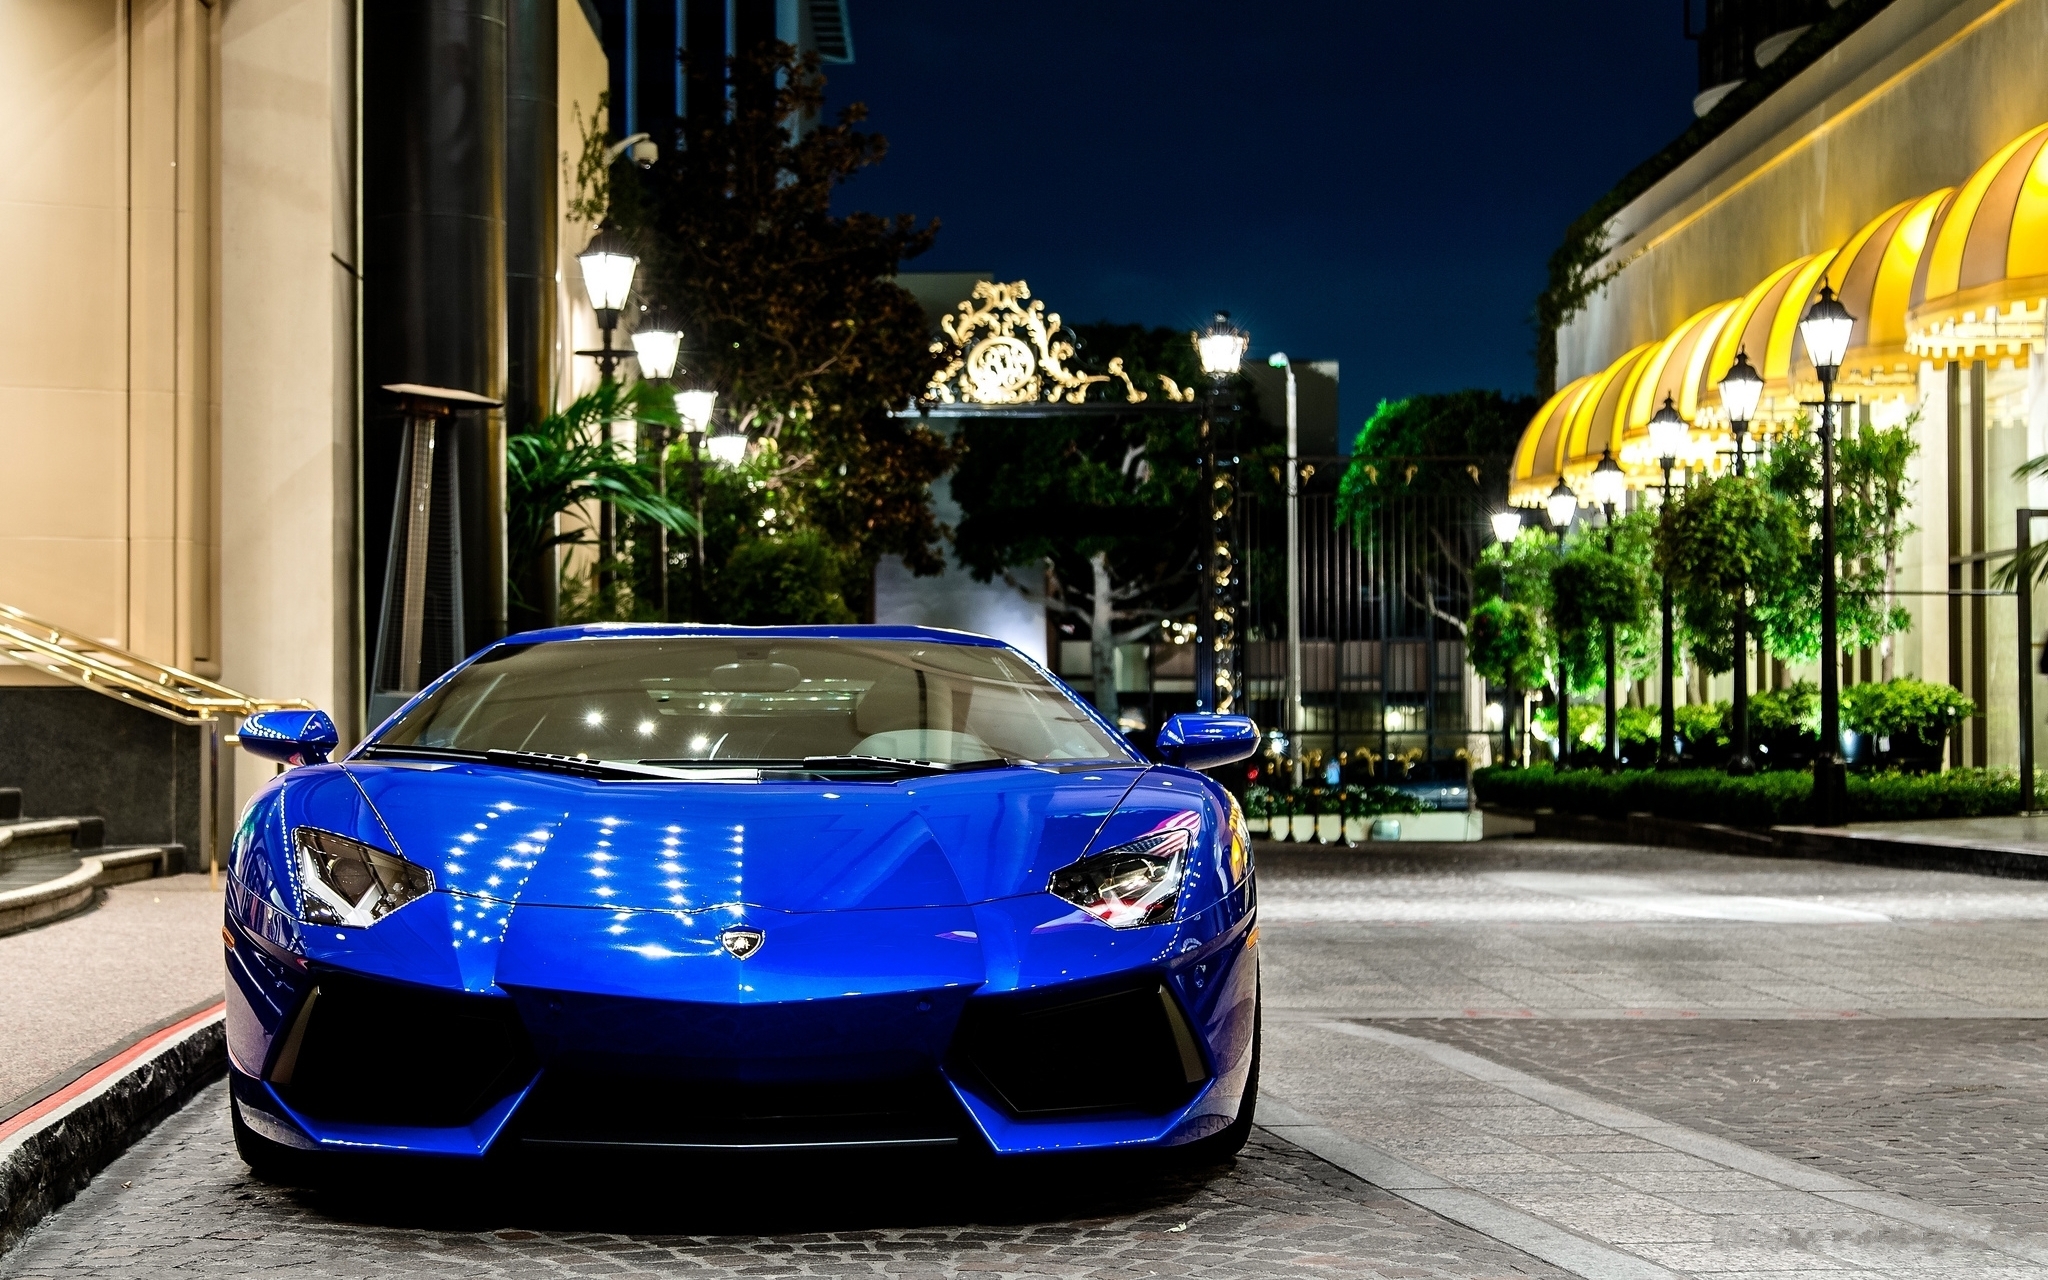 20044 download wallpaper auto, transport, lamborghini, black screensavers and pictures for free